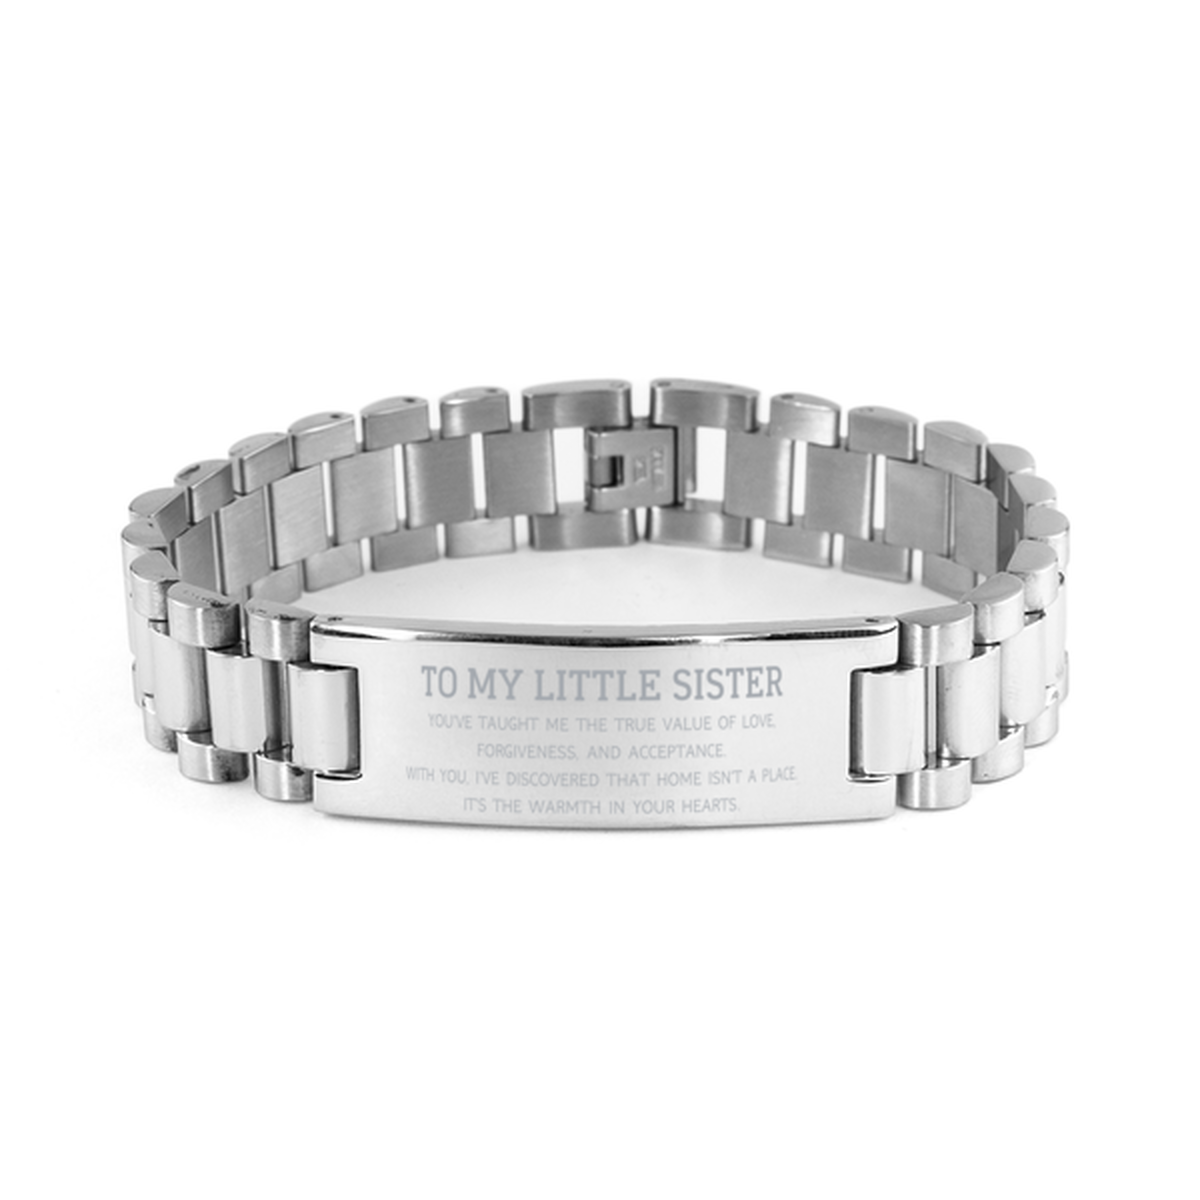 To My Little Sister Gifts, You've taught me the true value of love, Thank You Gifts For Little Sister, Birthday Ladder Stainless Steel Bracelet For Little Sister